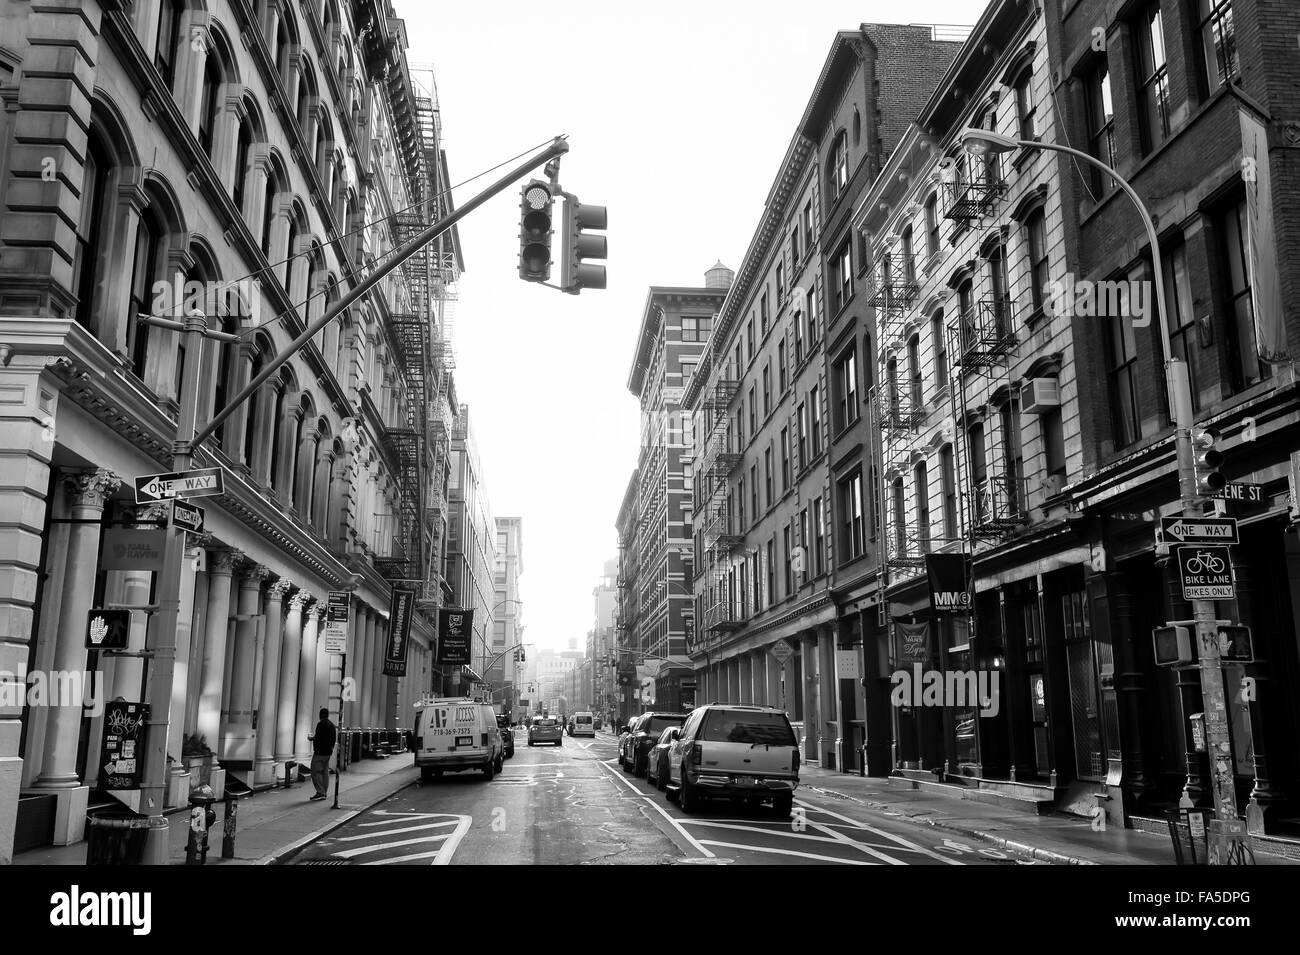 NEW YORK CITY, USA - DECEMBER 10, 2015: Downtown streets lined in traditional architecture in SoHo Cast Iron Historic District. Stock Photo